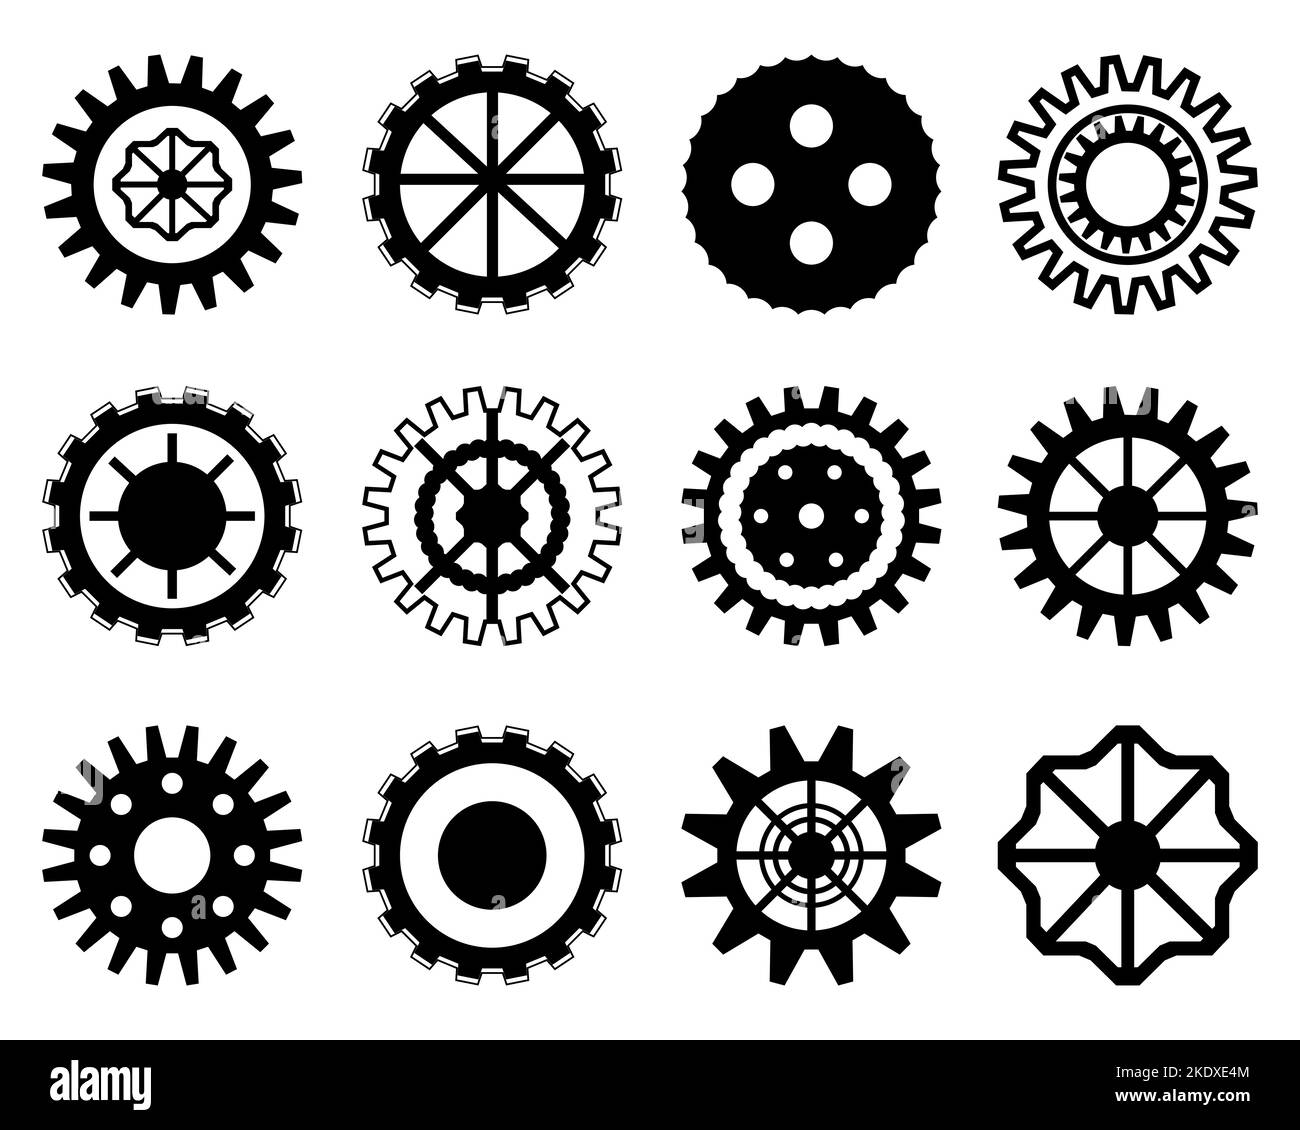 Collection of part engineering machine gear wheel icon element decorative technology graphic design abstract background vector illustration Stock Vector